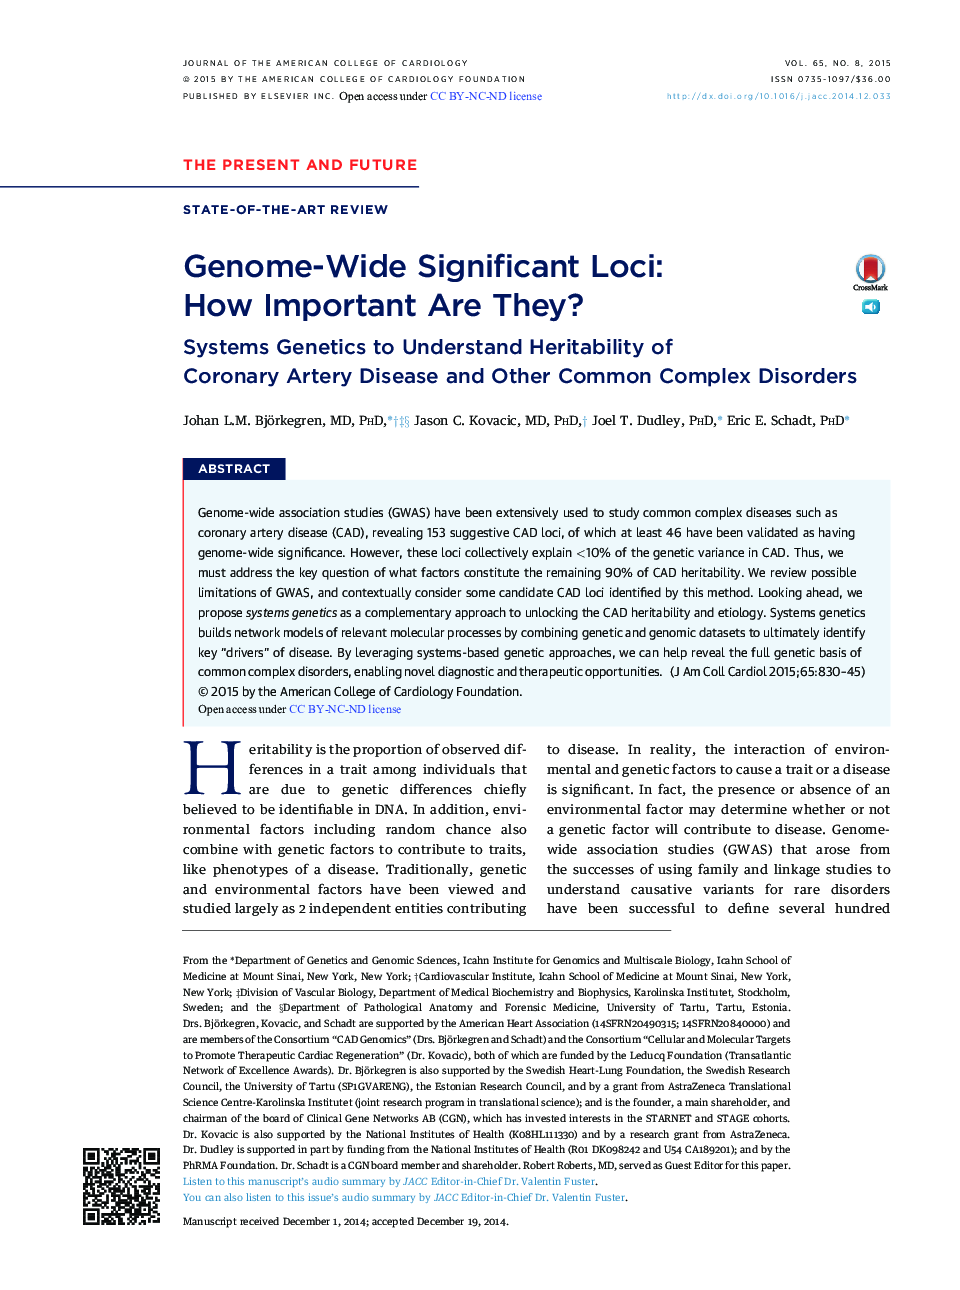 Genome-Wide Significant Loci: HowÂ Important Are They?: Systems Genetics to Understand Heritability of CoronaryÂ ArteryÂ Disease and Other Common Complex Disorders